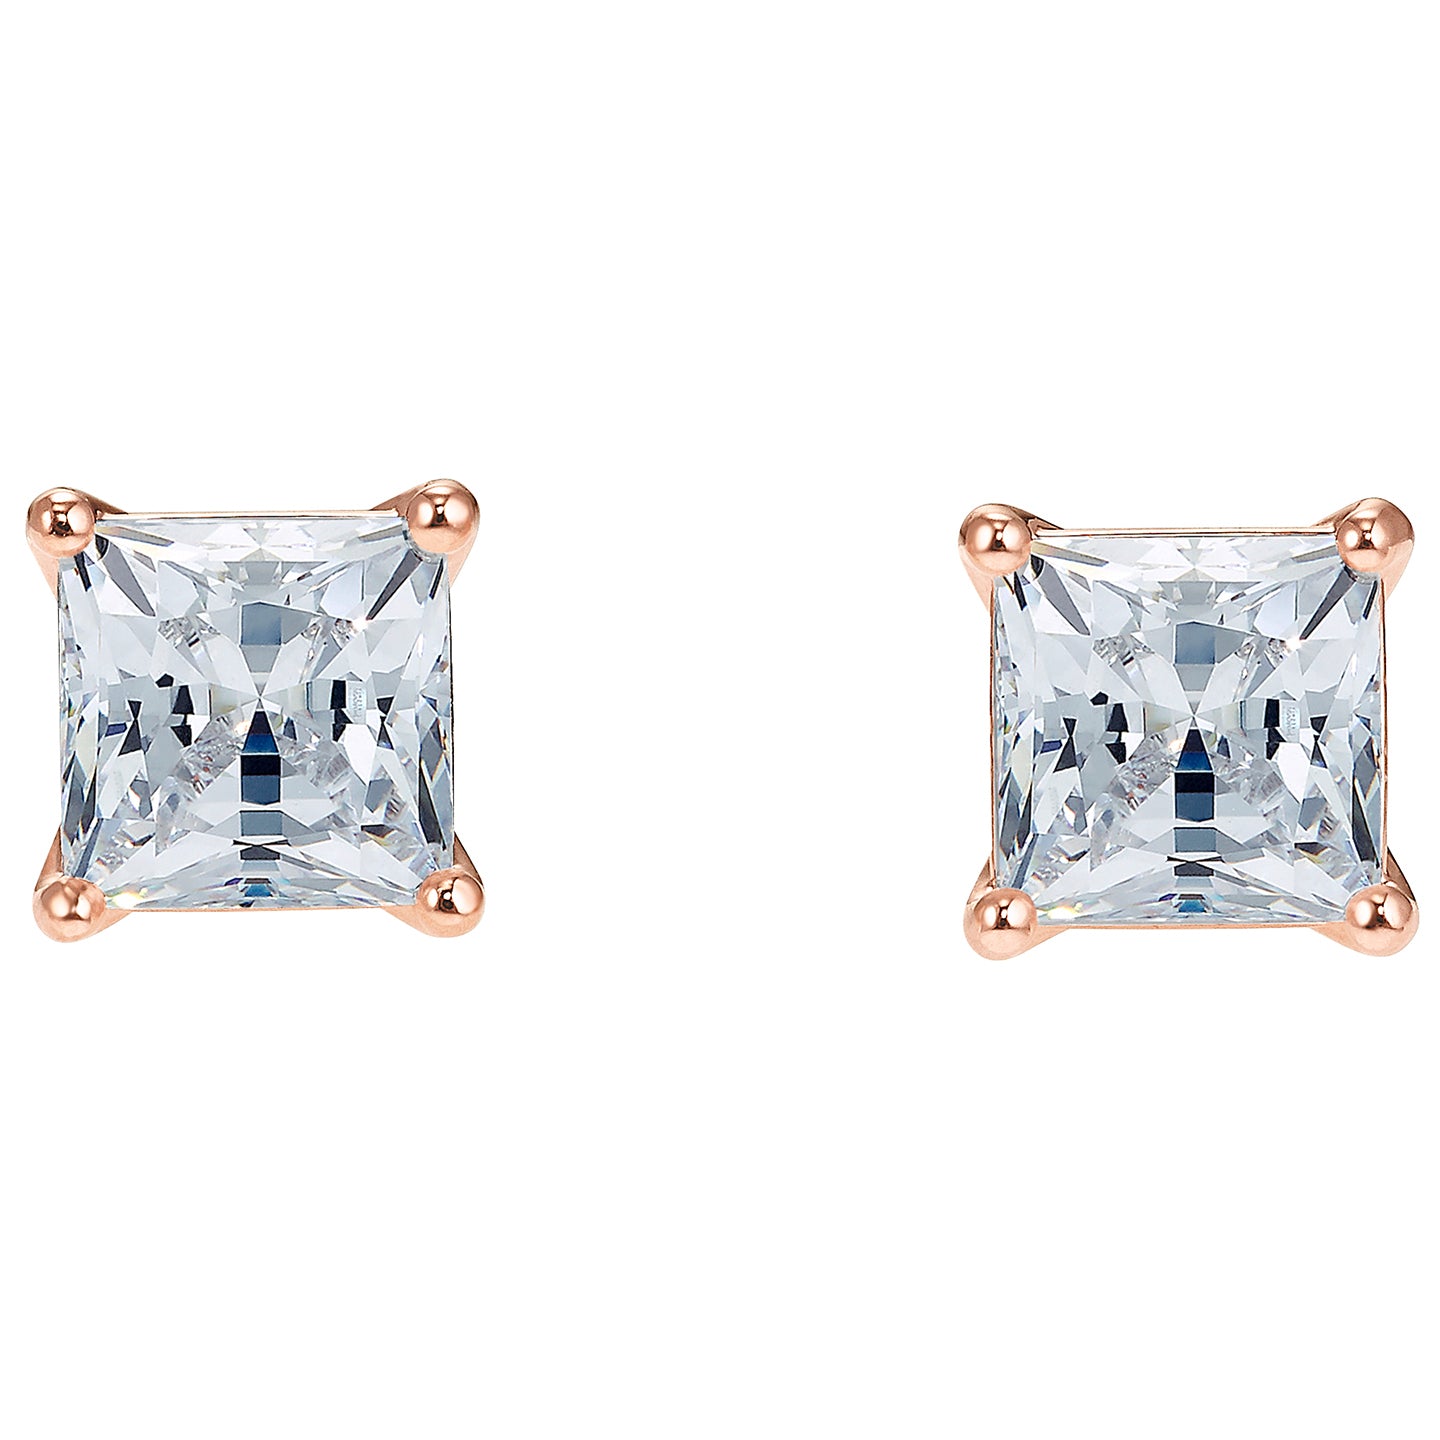 ATTRACT SQUARE PIERCED EARRINGS, WHITE, ROSE-GOLD TONE PLATED